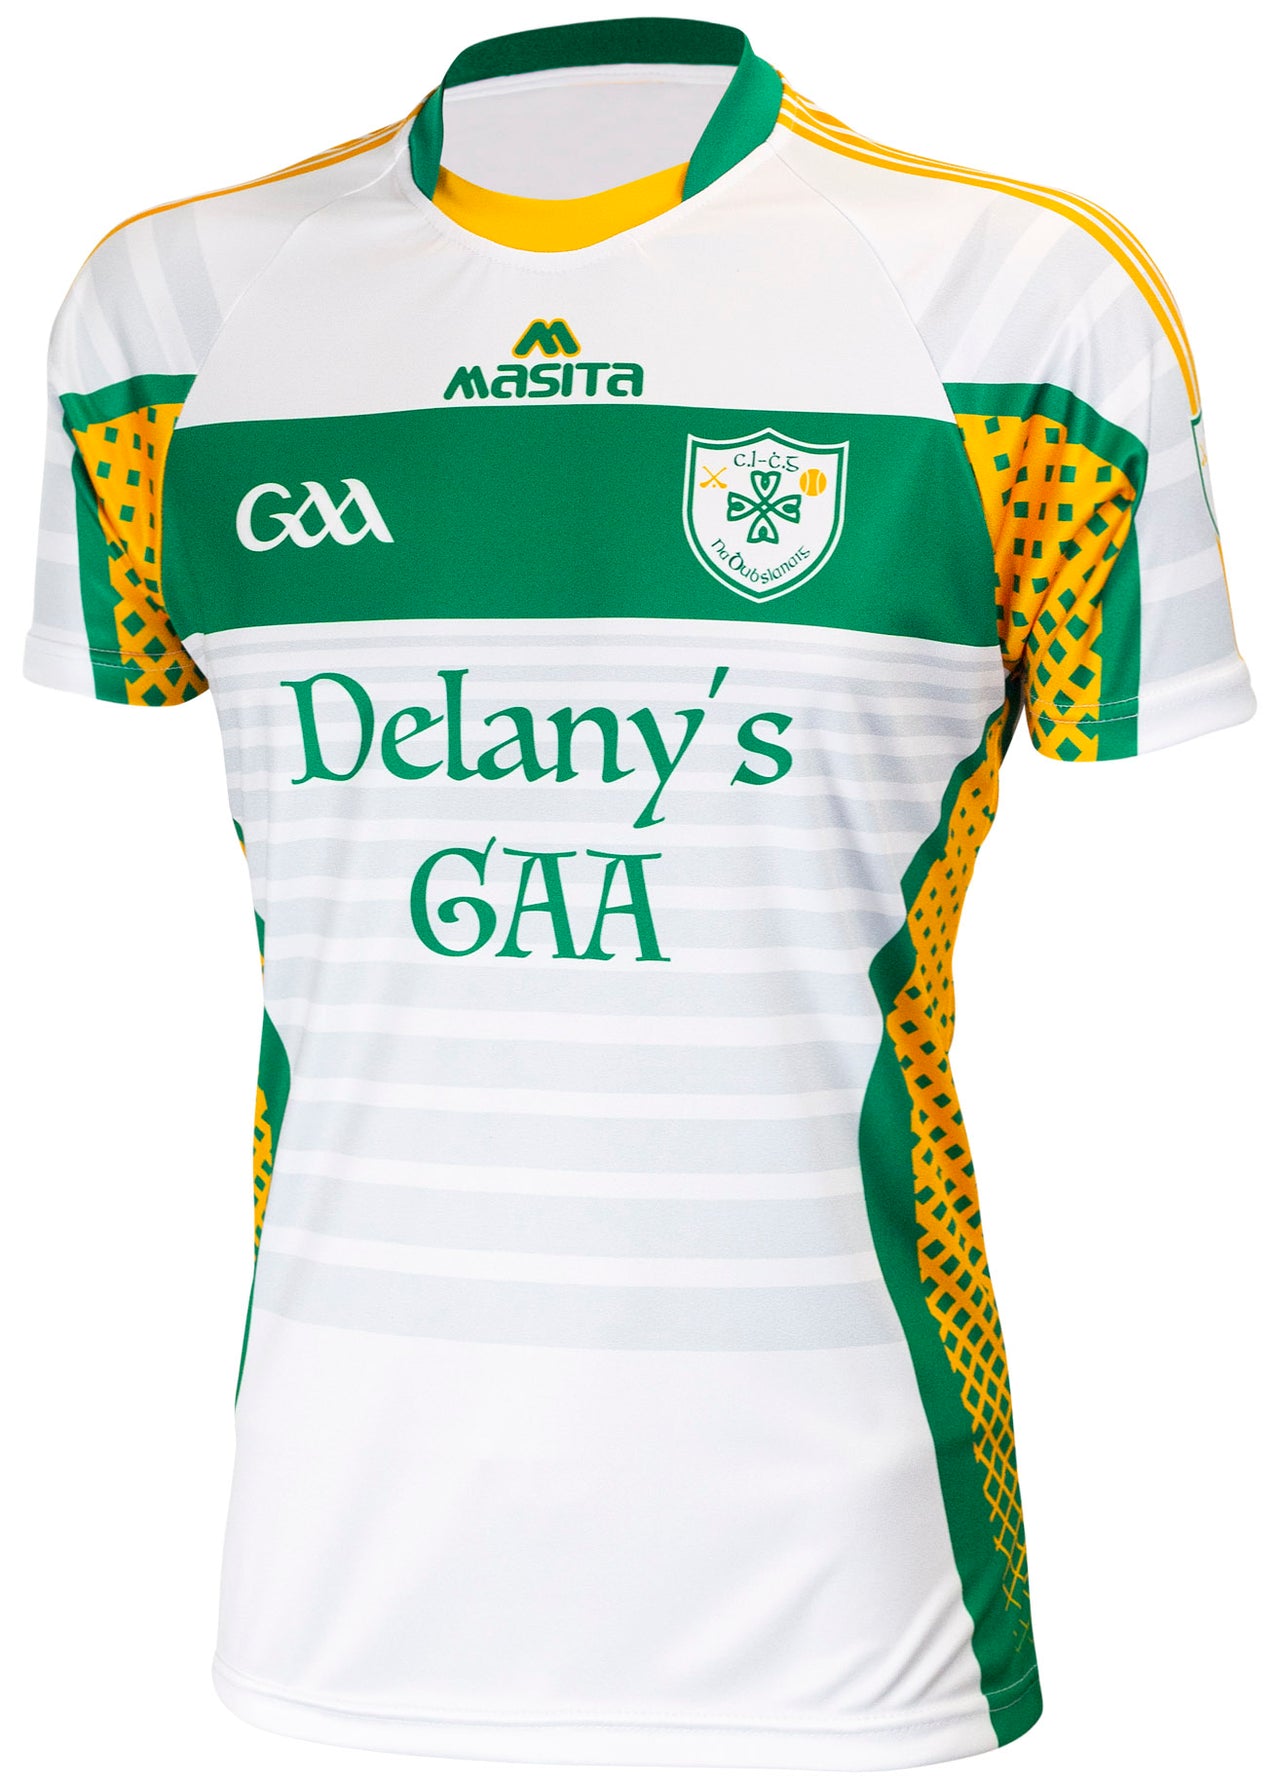 Delanys GAA Home Jersey Player Fit Adult